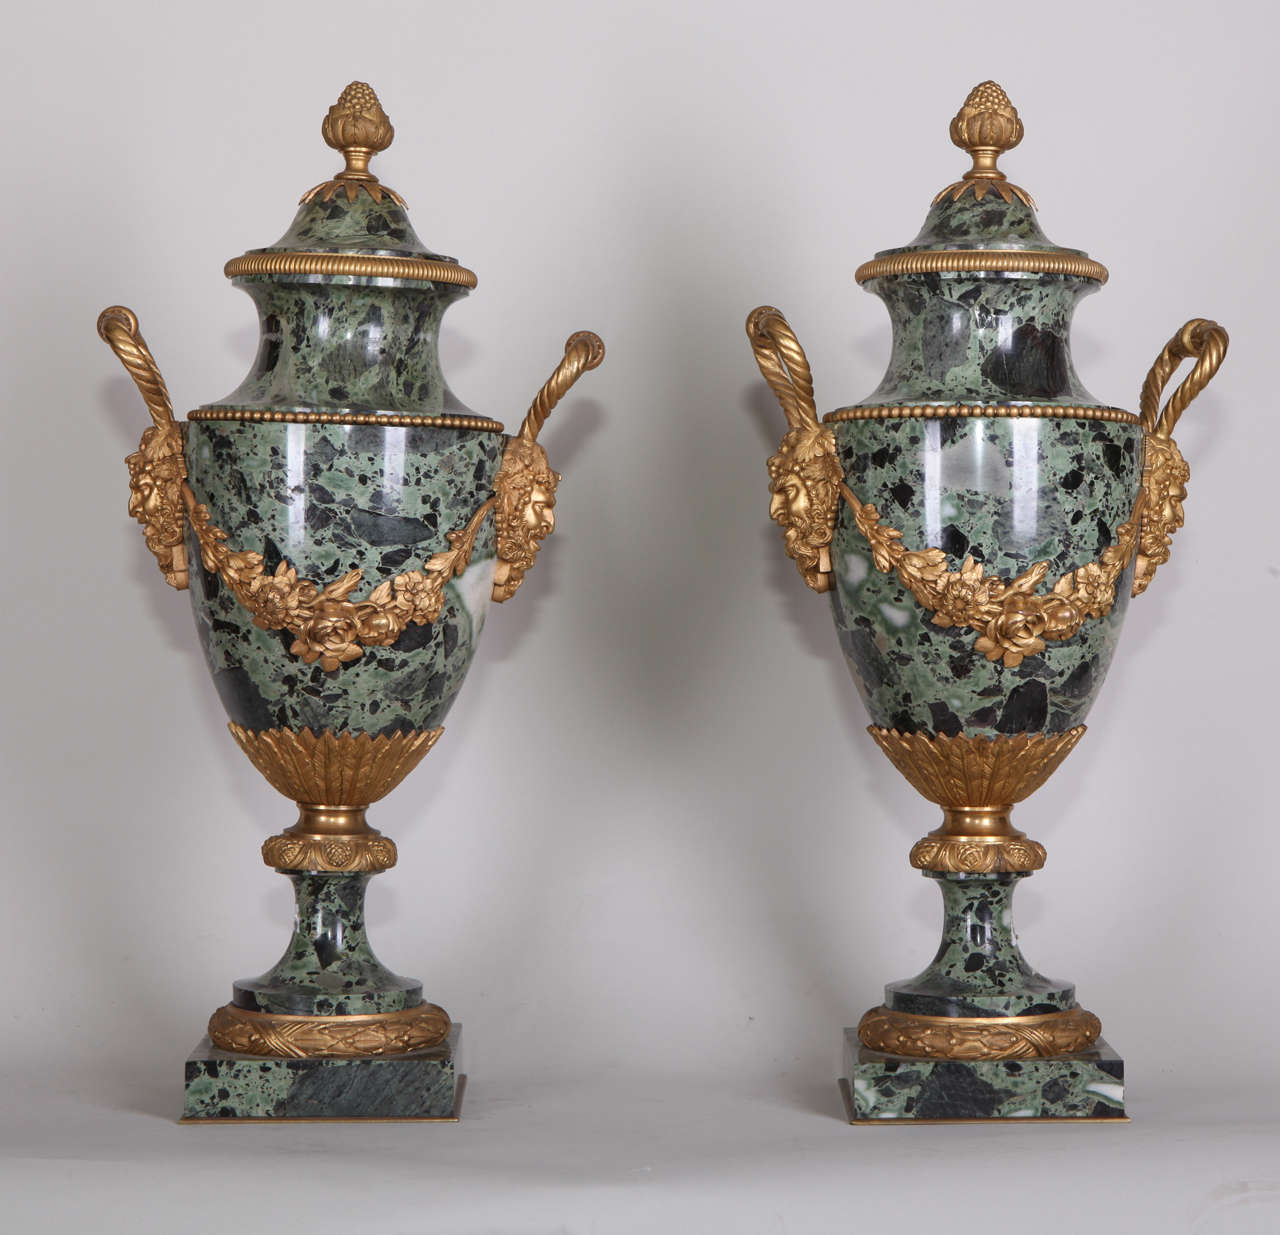 Decorated with mask shaped handles and flowers garlands. The lids with pomegranate finials, on a circular foot raised on a square base.